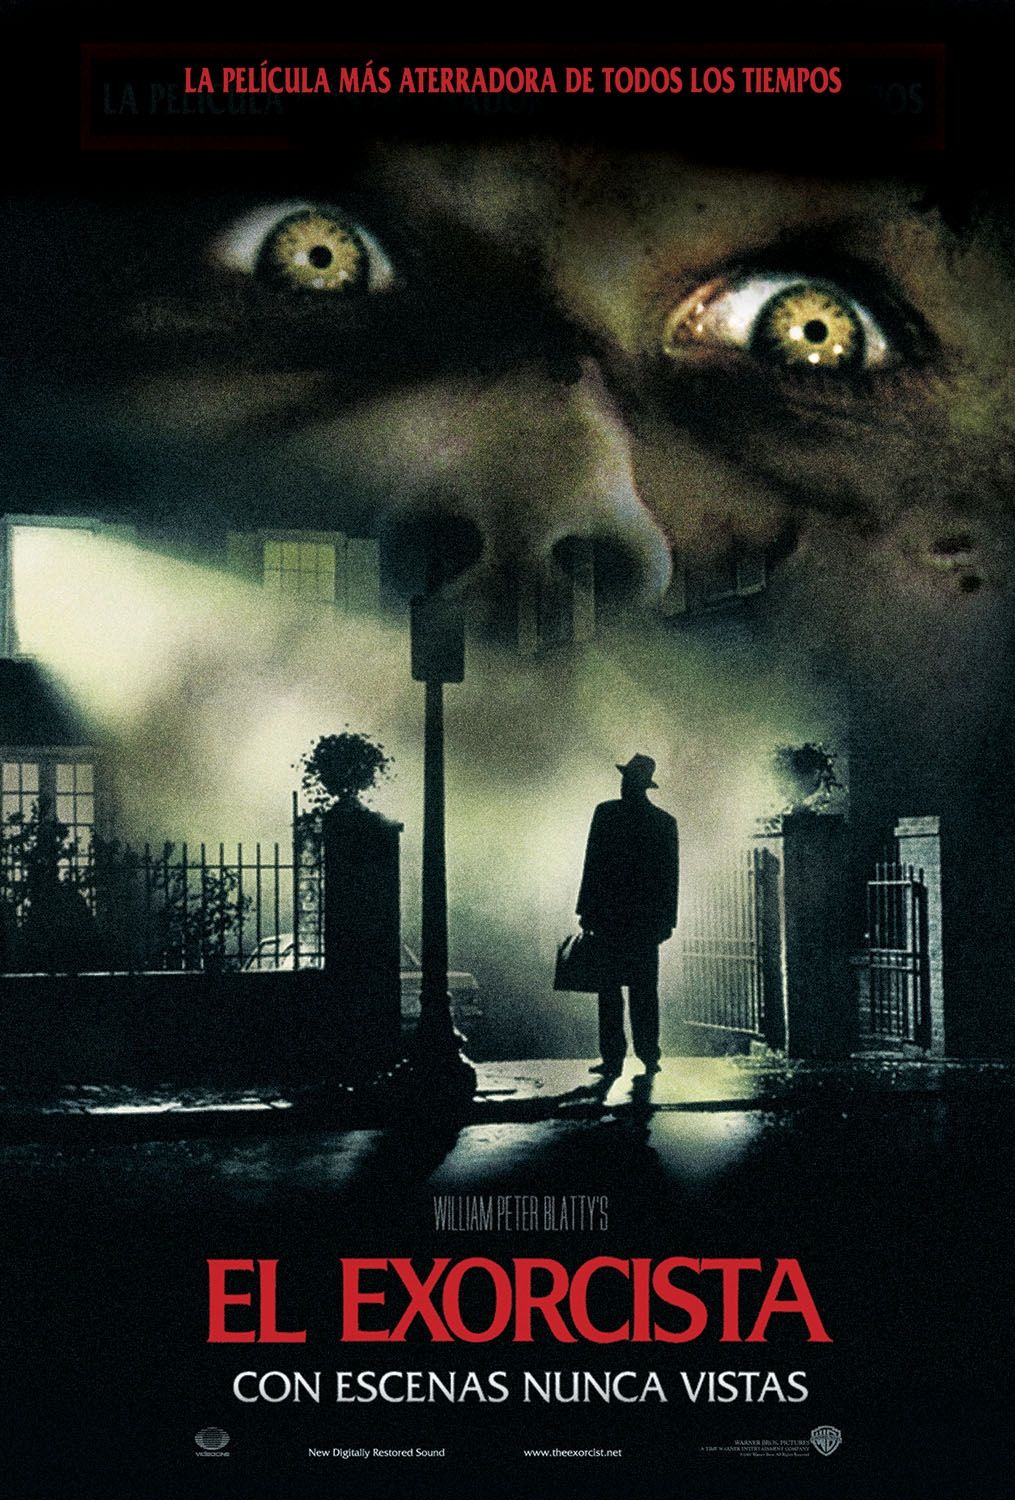 The Exorcist Poster